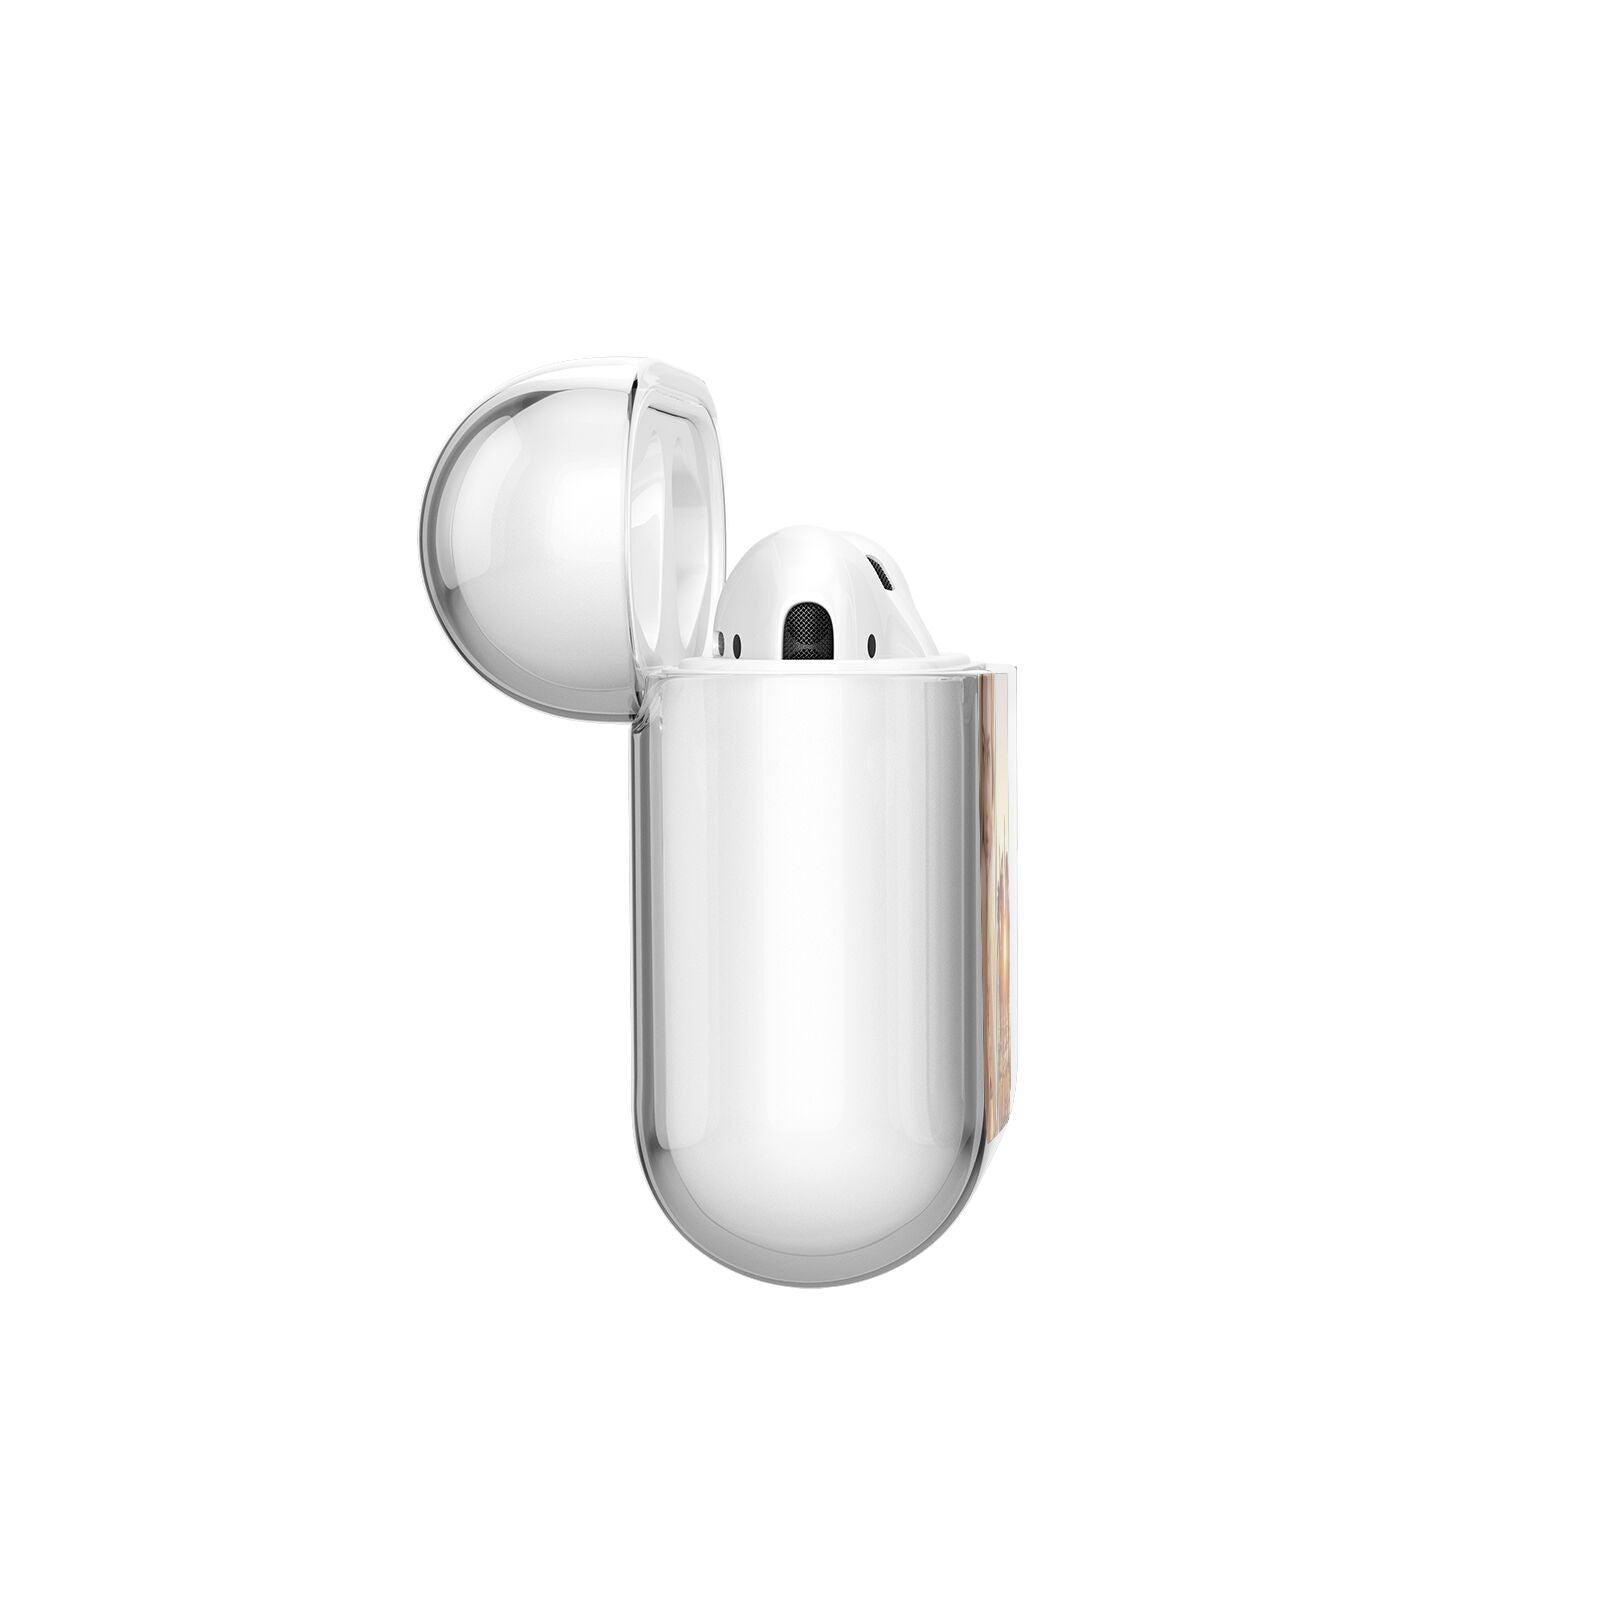 Two Horizontal Photo Tiles AirPods Case Side Angle